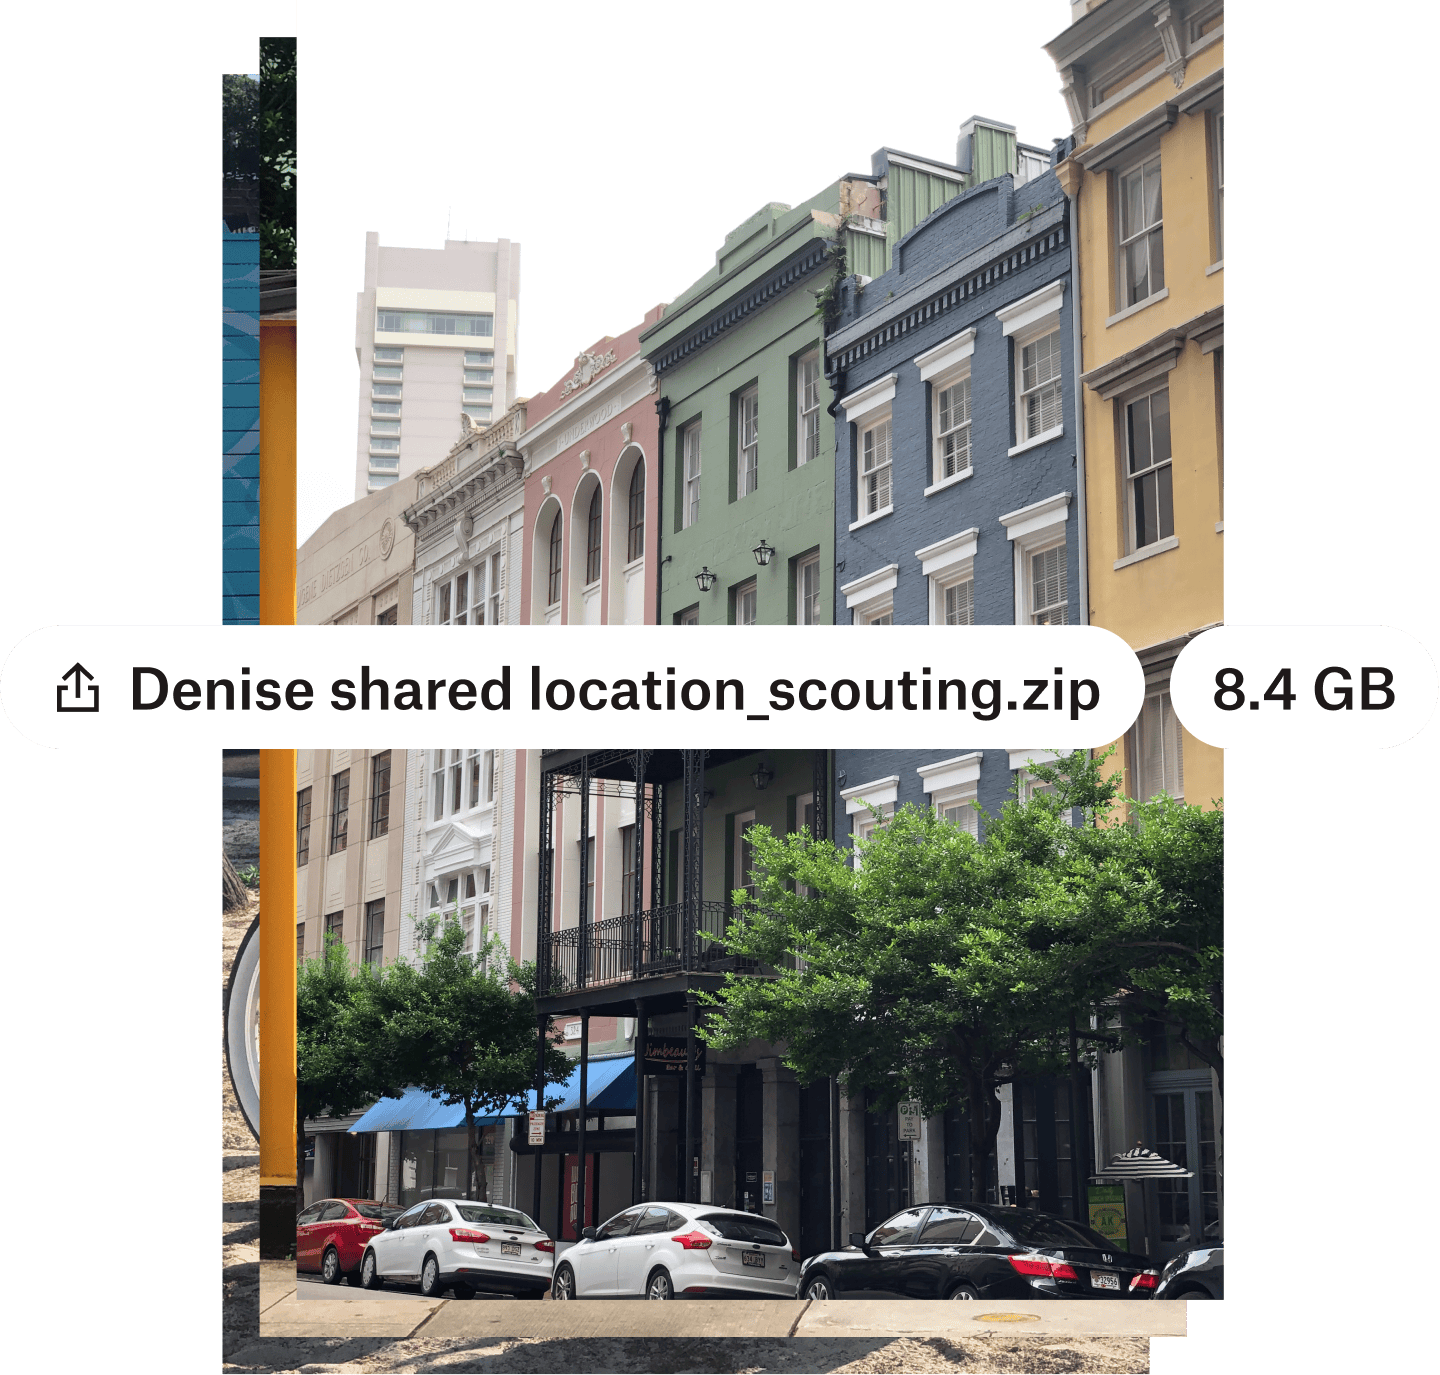 A photo of rowhouses in a city with the file name of the image superimposed over it